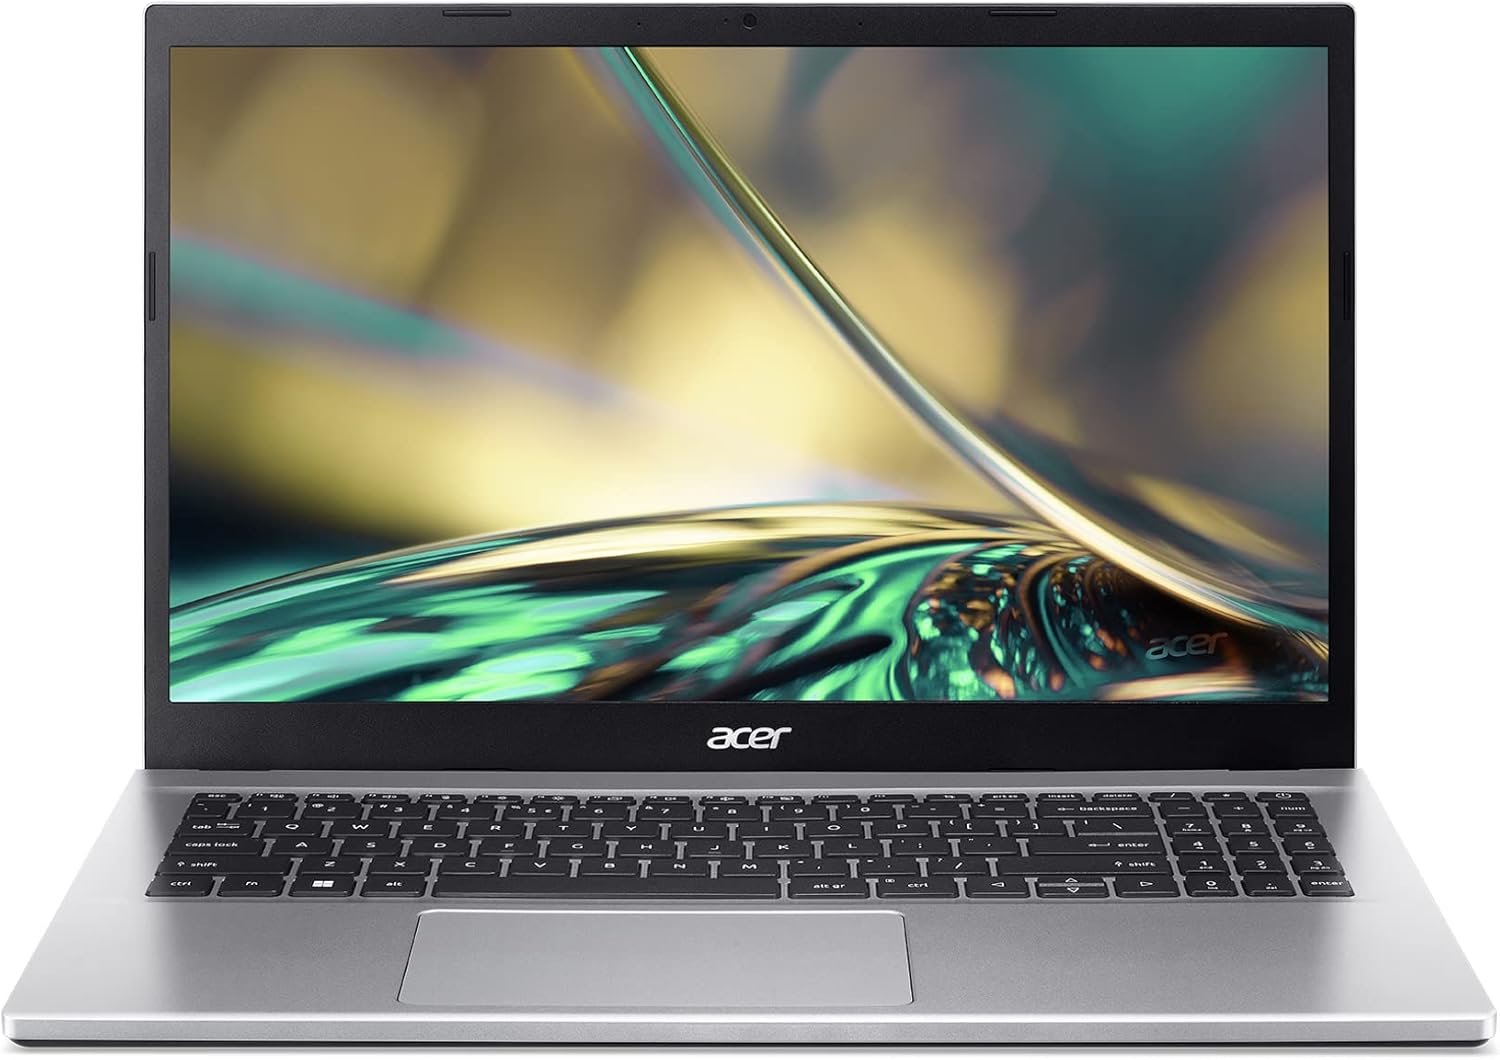 acer Aspire 3 2023 Business Laptop 15.6"" FHD IPS 4-Core Intel i7-1165G7 32GB DDR4 1TB SSD Intel Iris Xe Graphics Wi-Fi 5 Win11 Home w/ONT 32GB USB, Pure Silver